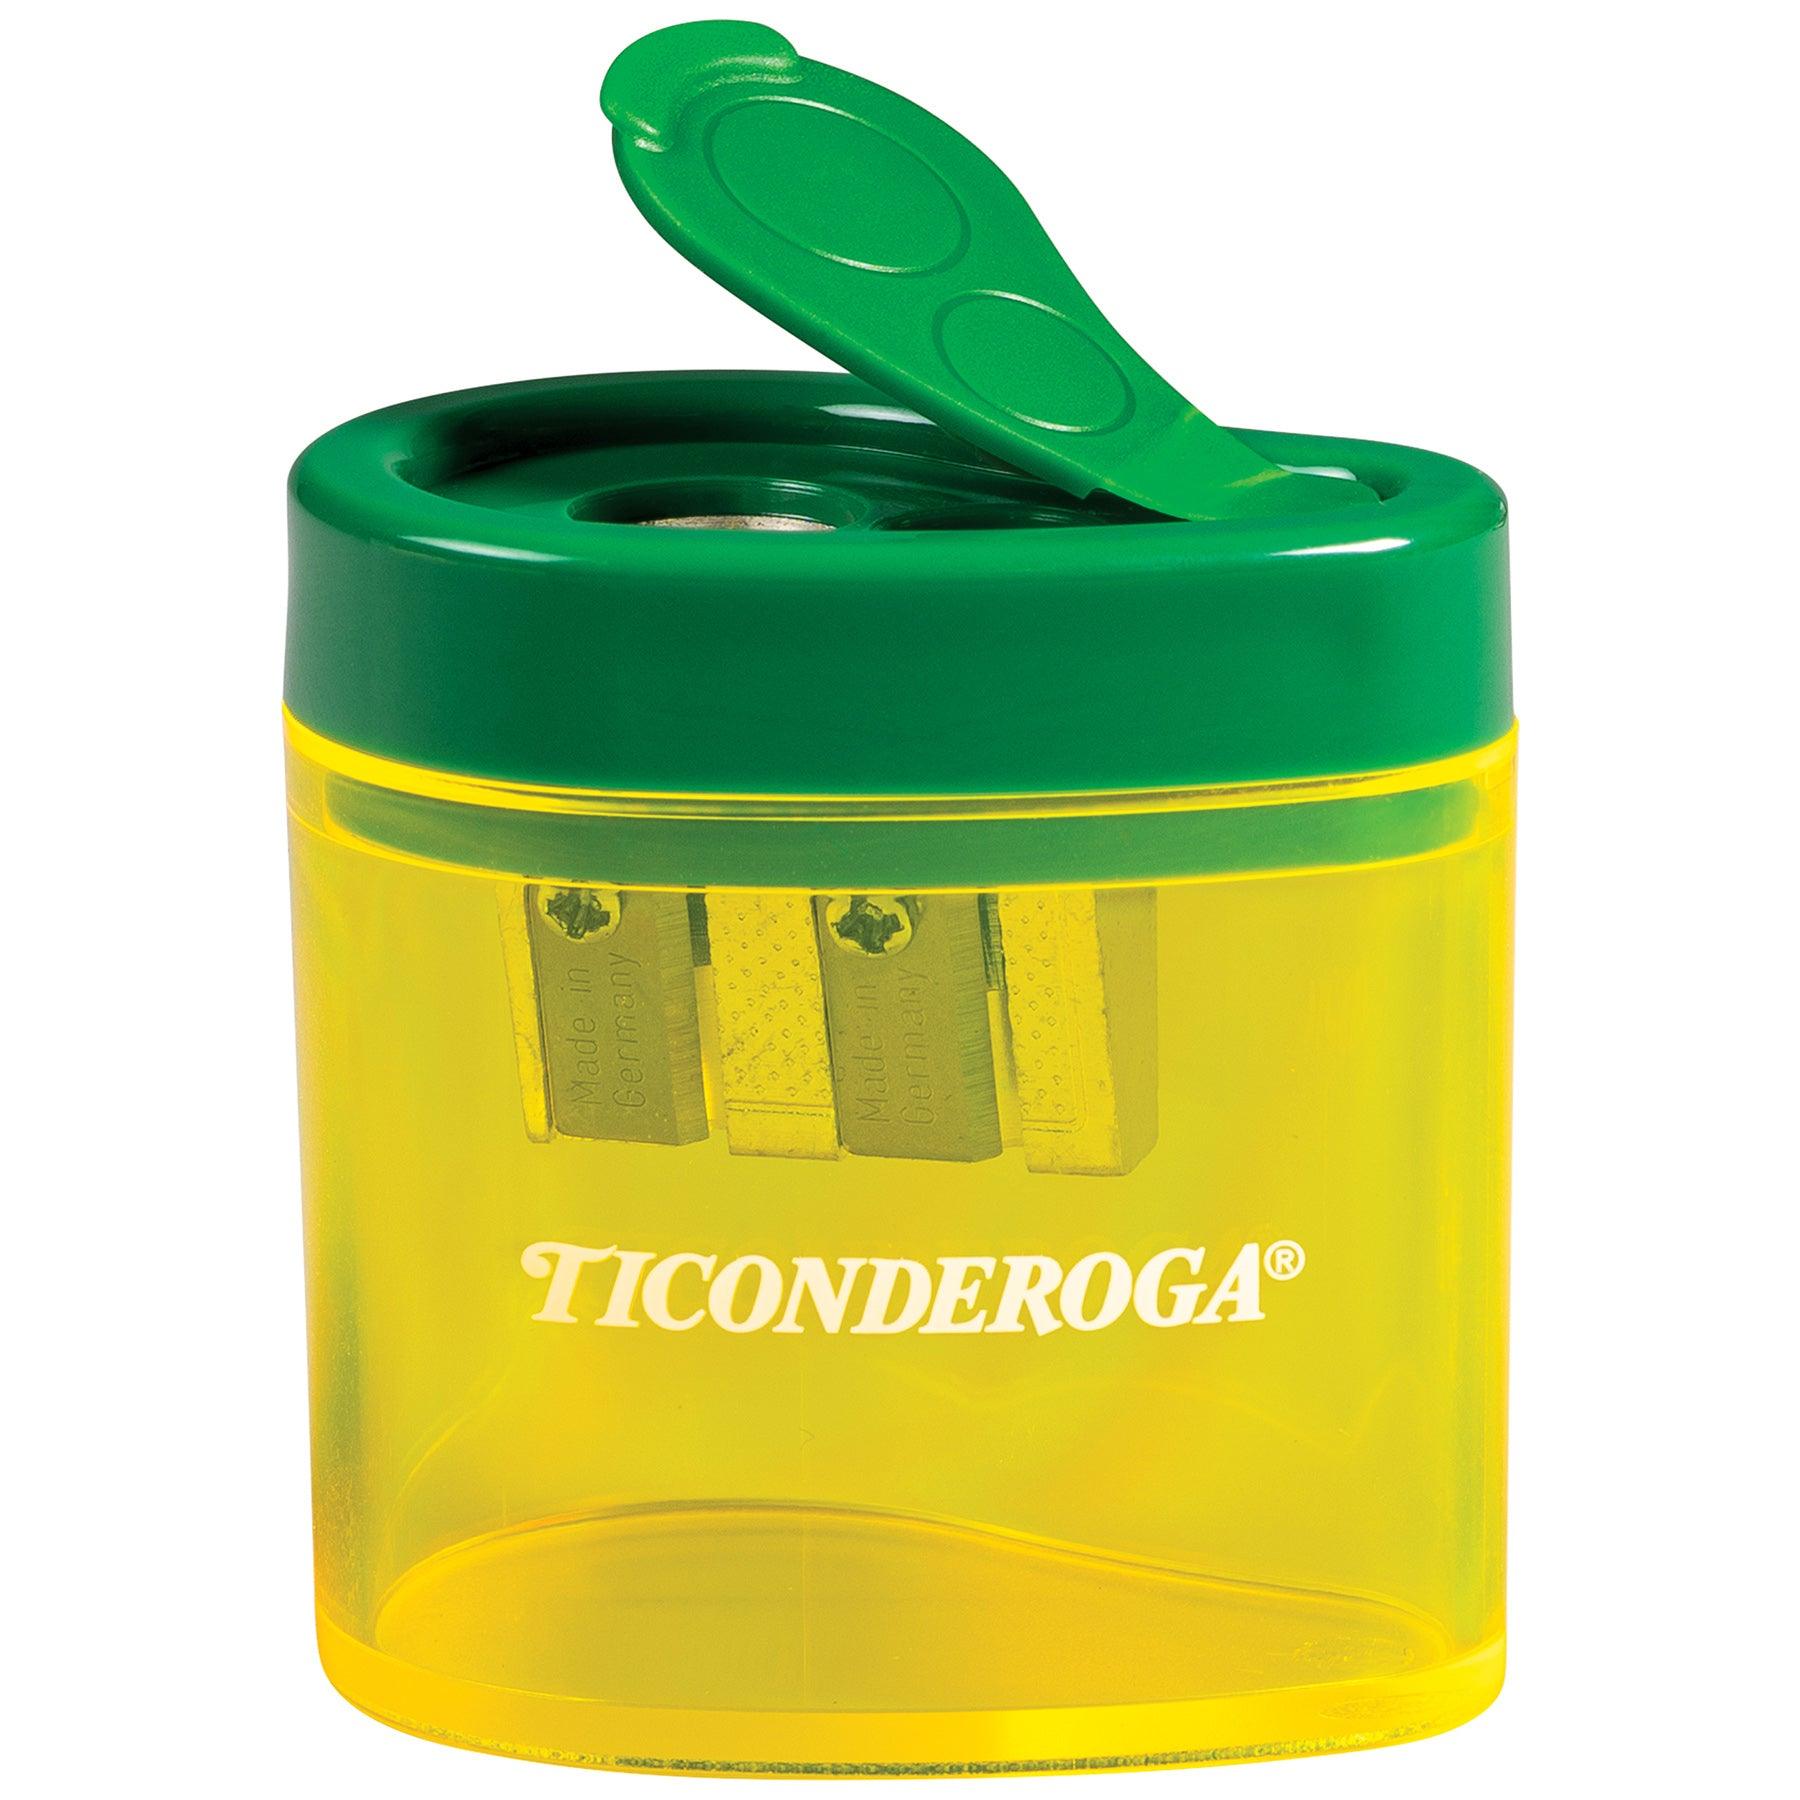 Two Hole Pencil Sharpener, Green/Yellow, Pack of 6 - Loomini